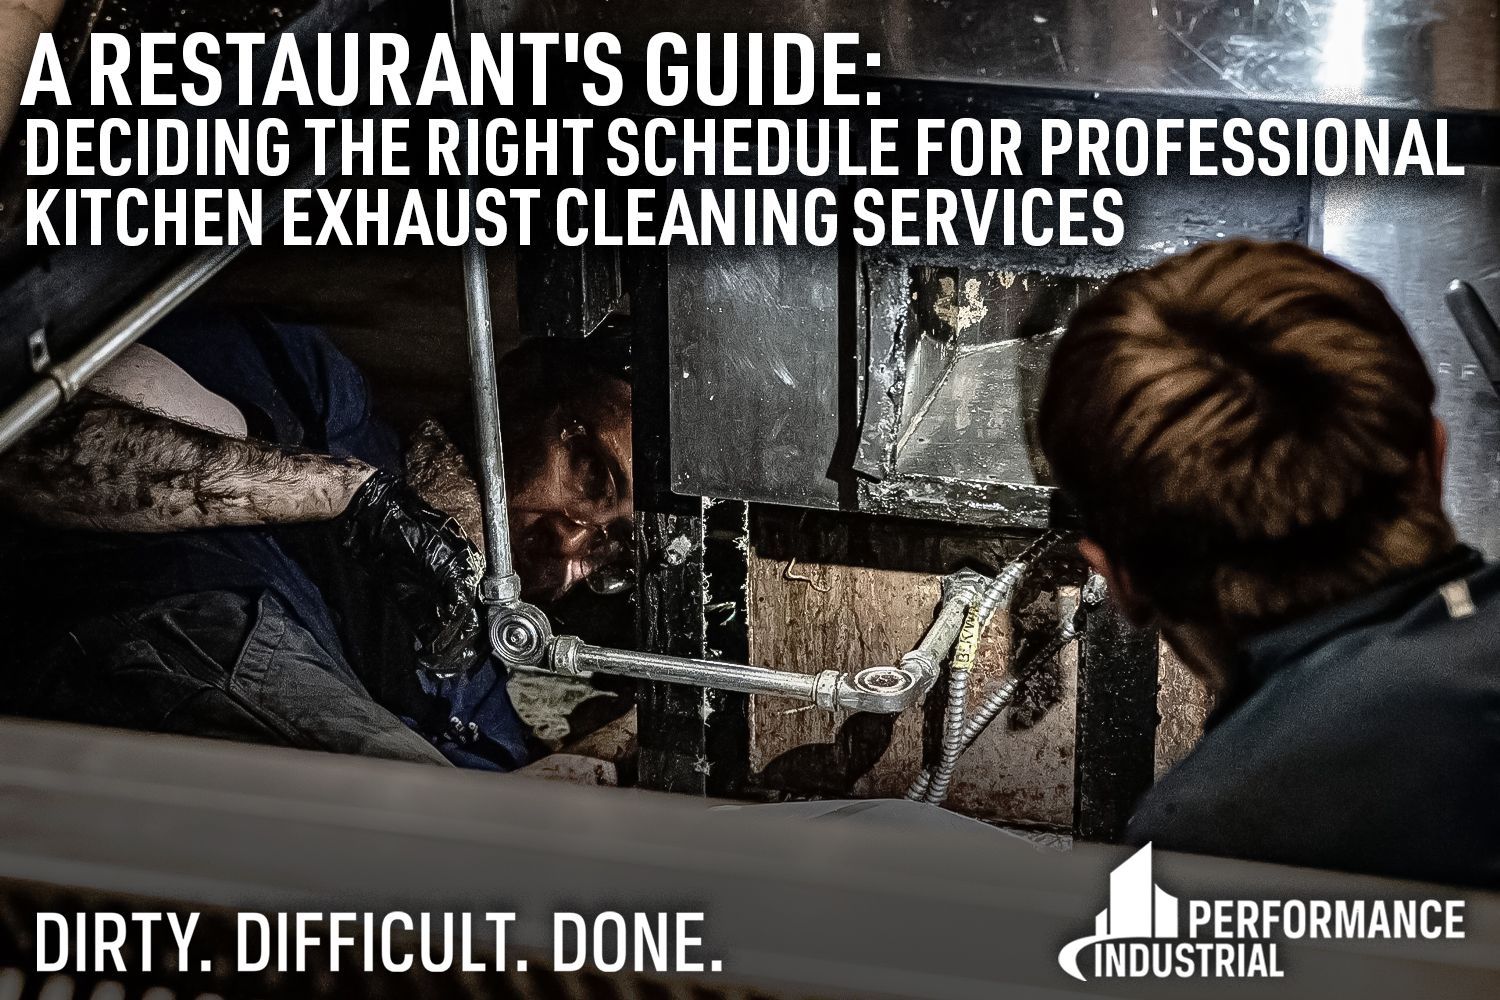 Restaurant's guide deciding the right schedule for professional kitchen exhaust cleaning services | 